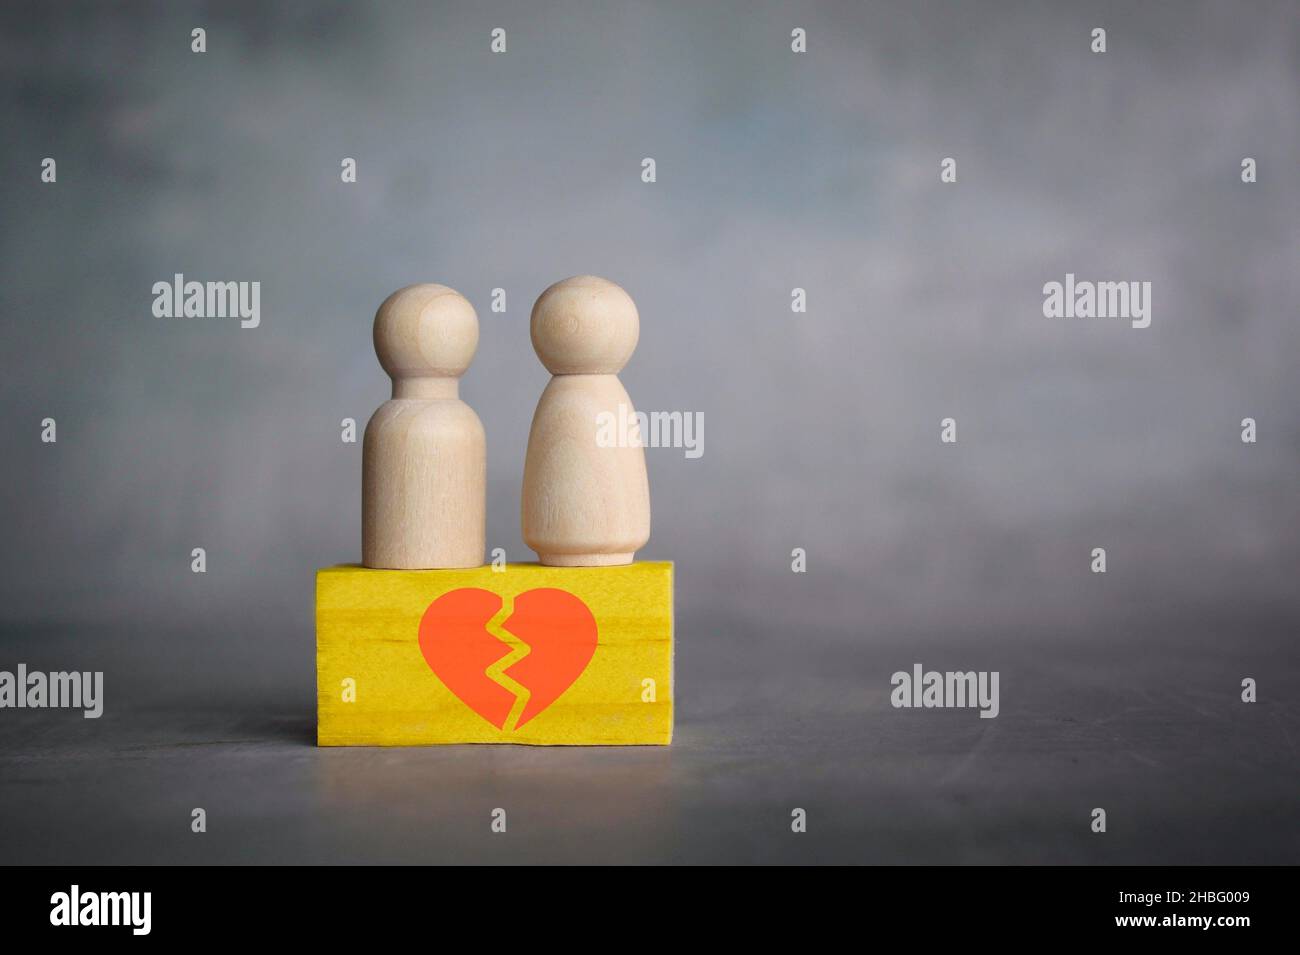 Divorce and broken relationship concept. Wooden dolls and wooden block with broken heart icon. Stock Photo